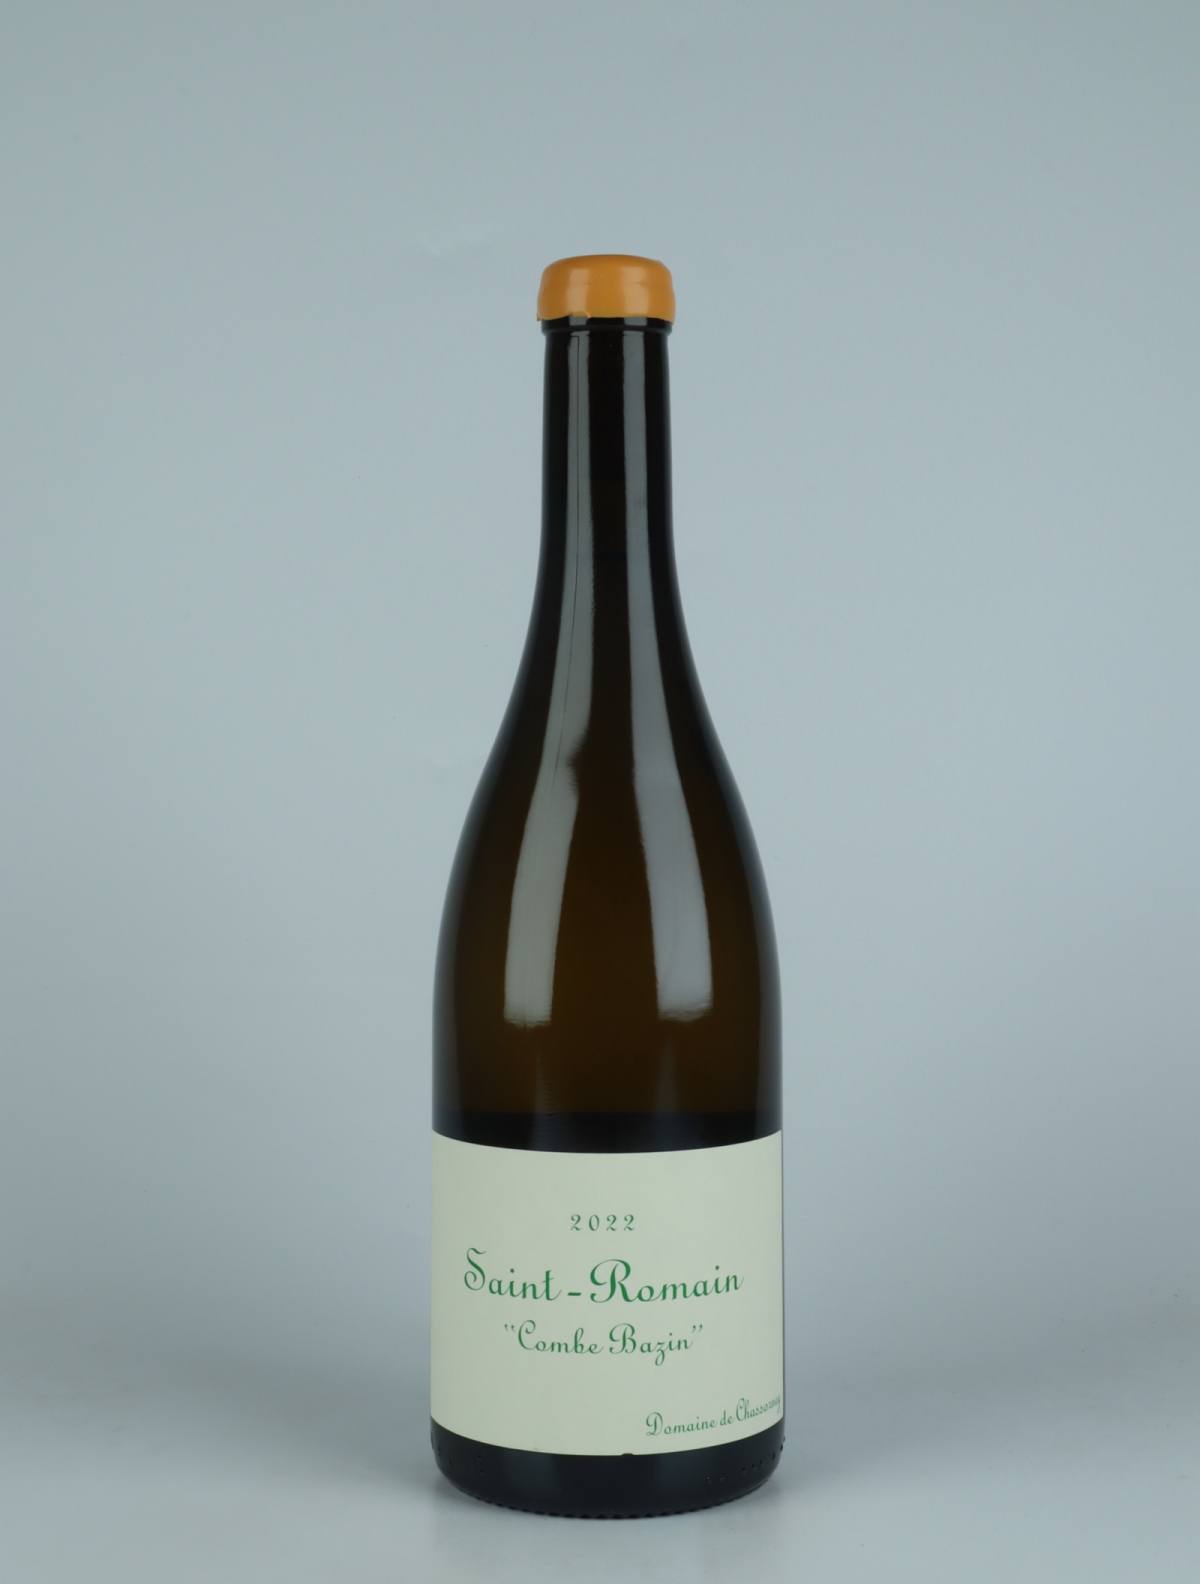 A bottle 2022 Saint Romain Blanc - Combe Bazin White wine from Domaine de Chassorney, Burgundy in France